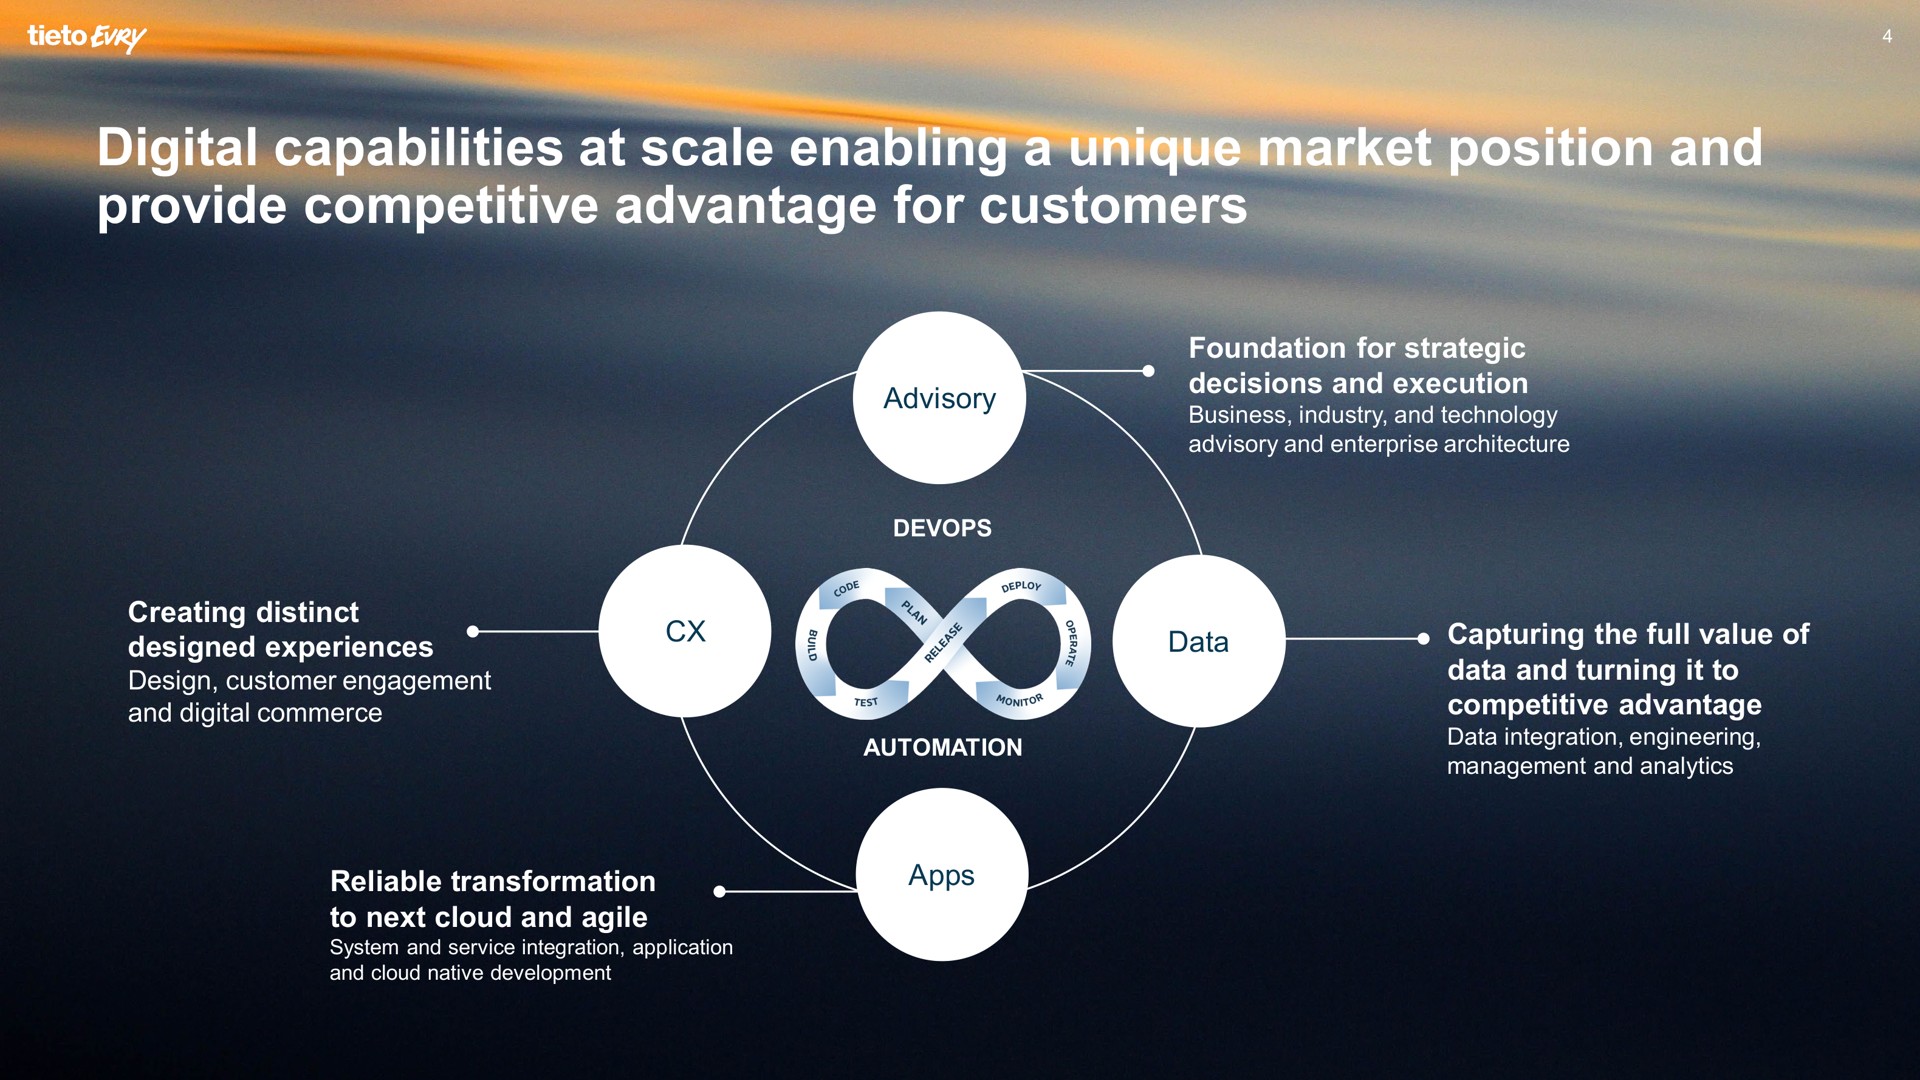 digital capabilities at scale enabling a unique market position and provide competitive advantage for customers | Tietoevry